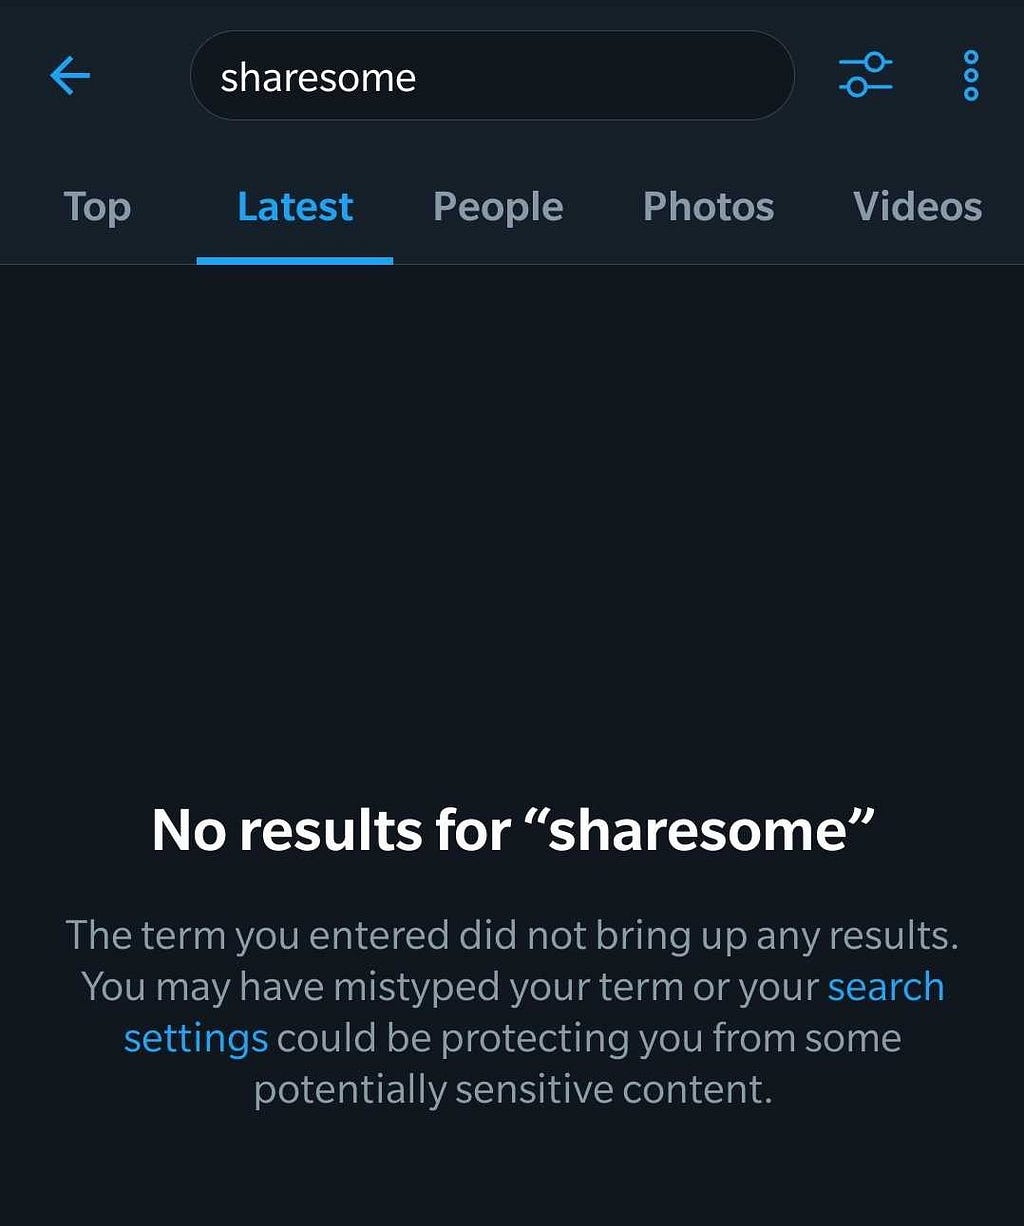 Twitter shadow-banning Sharesome in the search results